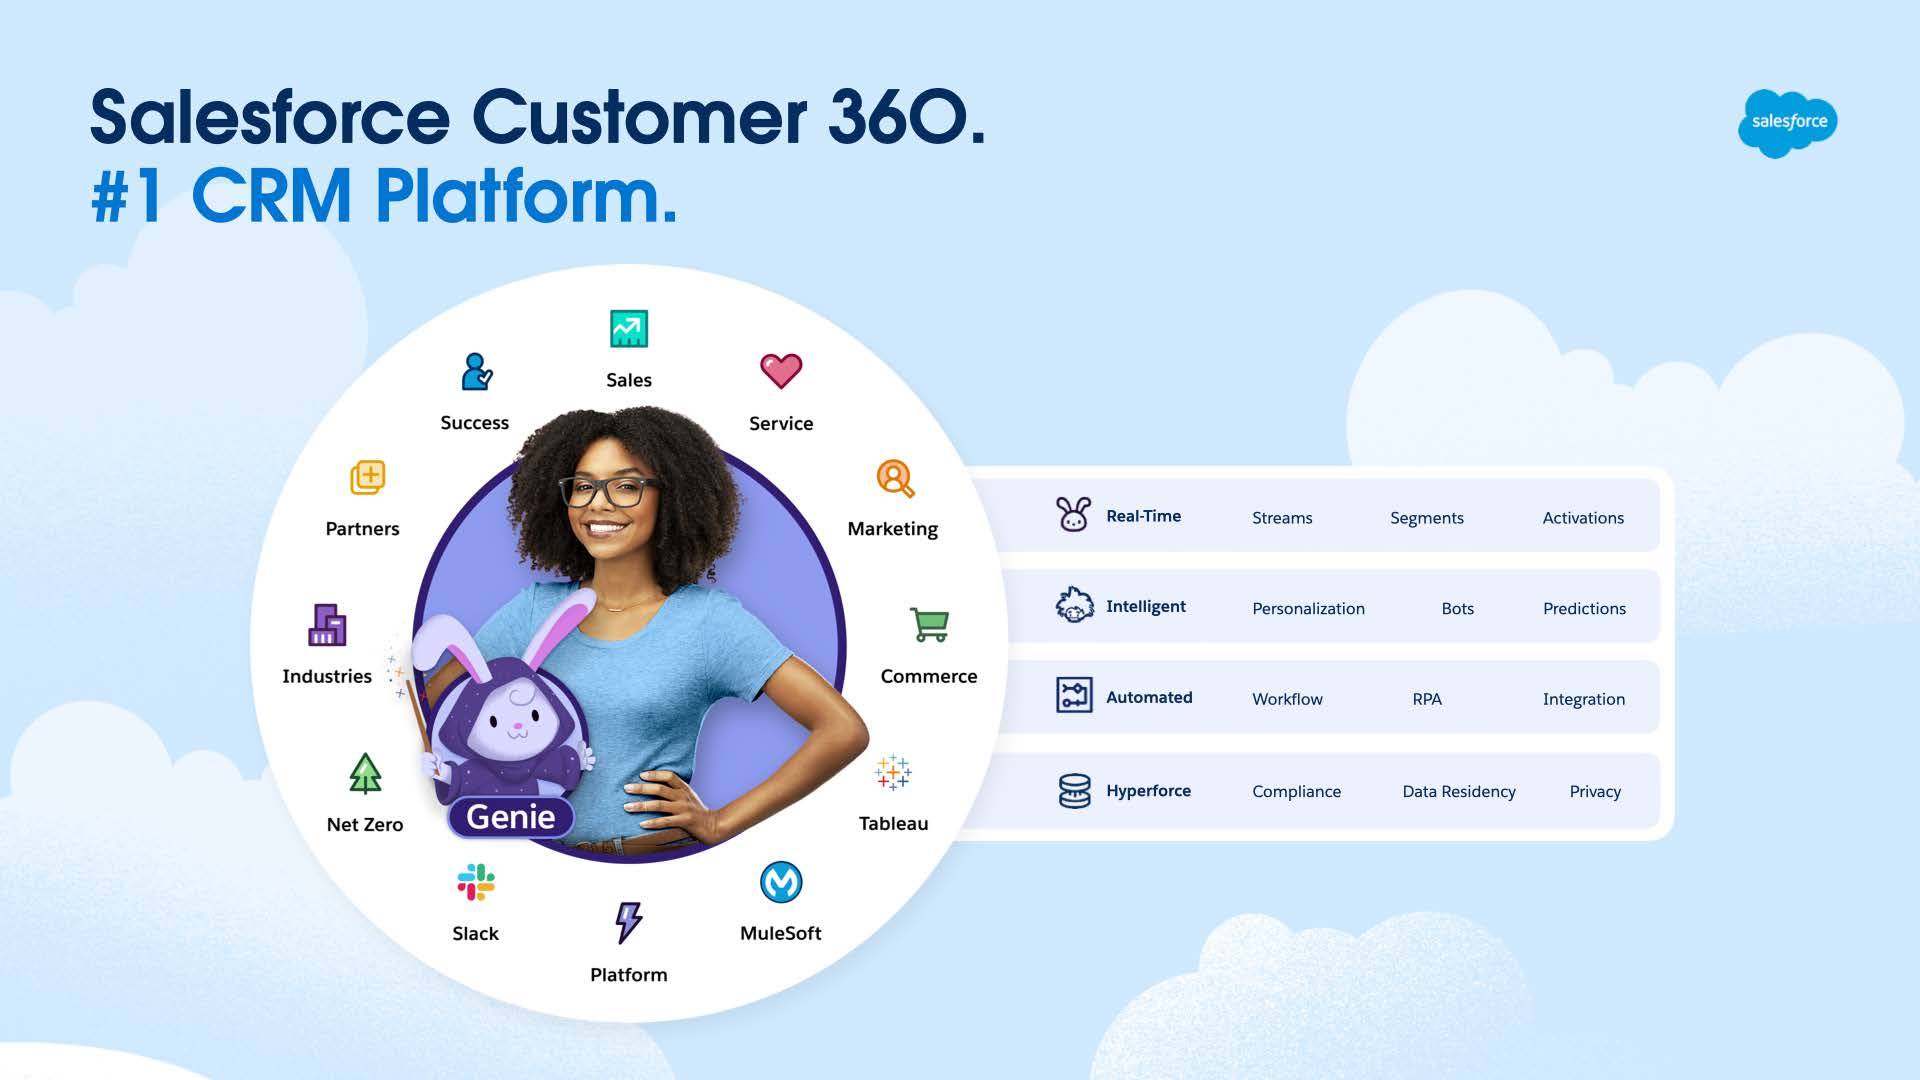  Salesforce Customer 360: Save time. Save money. Grow revenue. Real time, intelligent, automated, Hyperforce. 